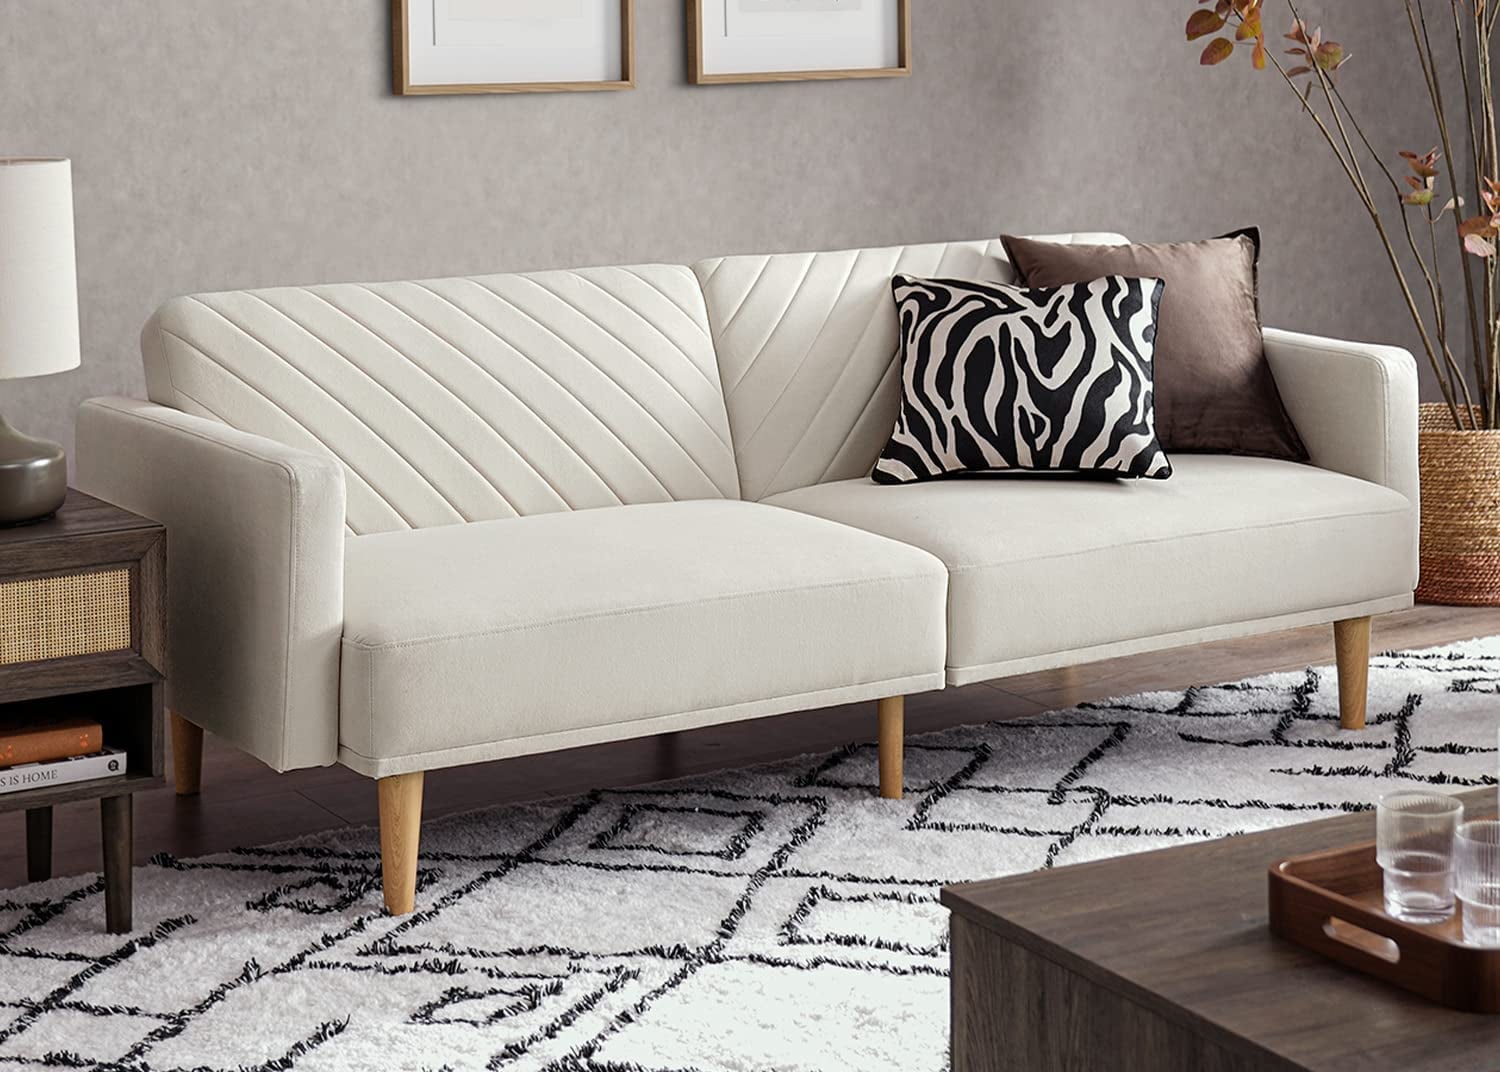 Affordable Furniture Store: Home Furniture for Less Online